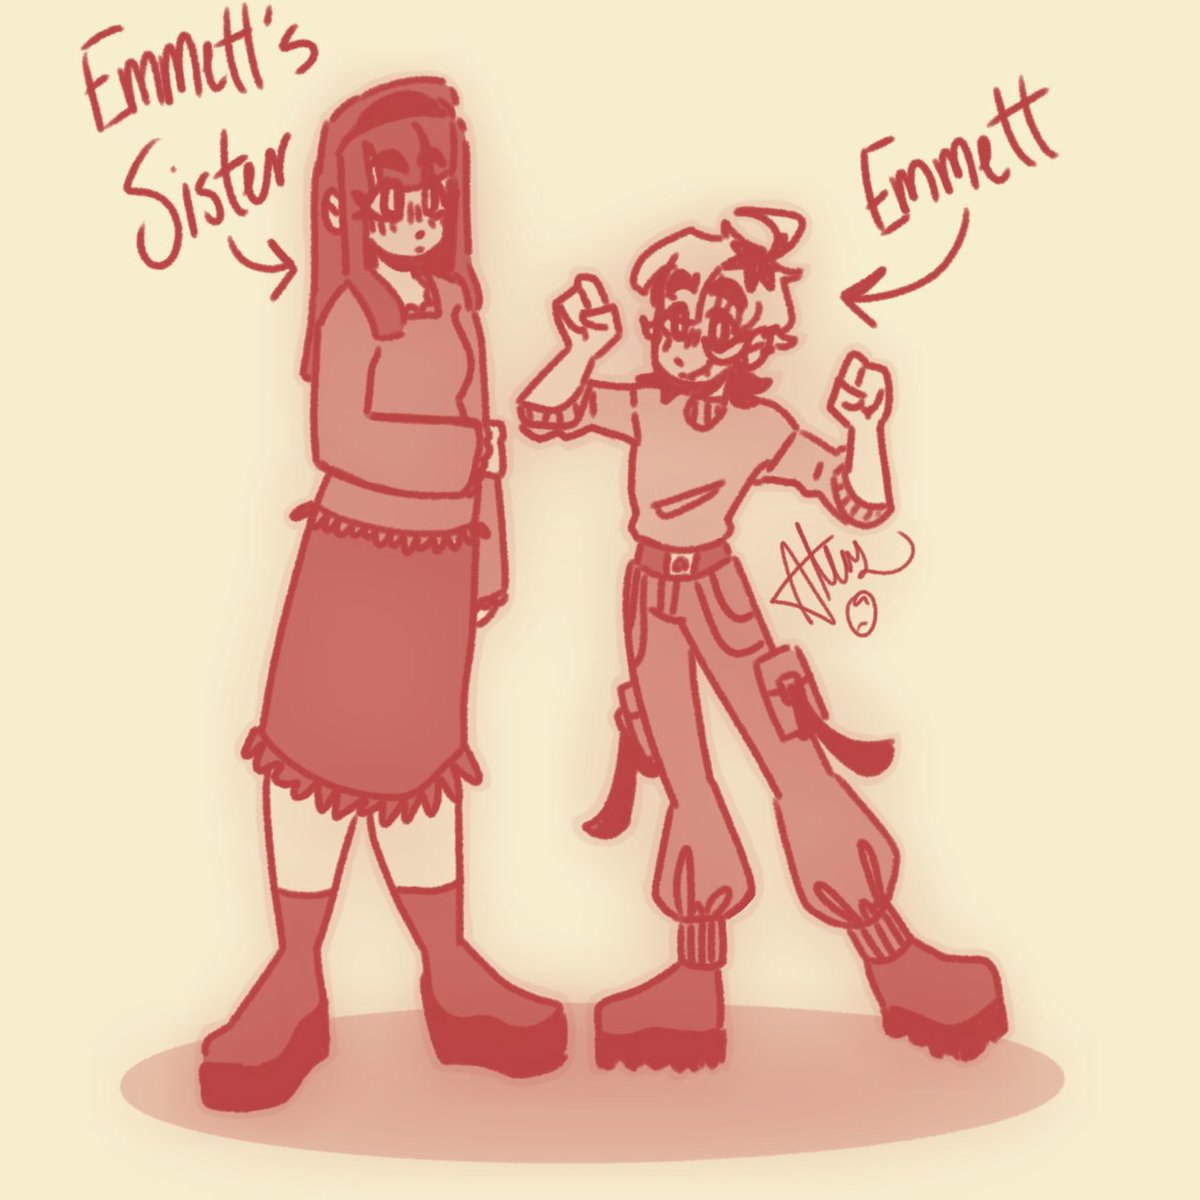 here is emmett and his sister! I'm still deciding on her name, so feel free to leave suggestions in the comments! 

#oc #ocart #sketch #digitalart #transoc #characterdesign #artortoisemy #originalart #ibispaint #ibispaintx #digitalartist  #gothgirloc #gothgirl #siblingocs